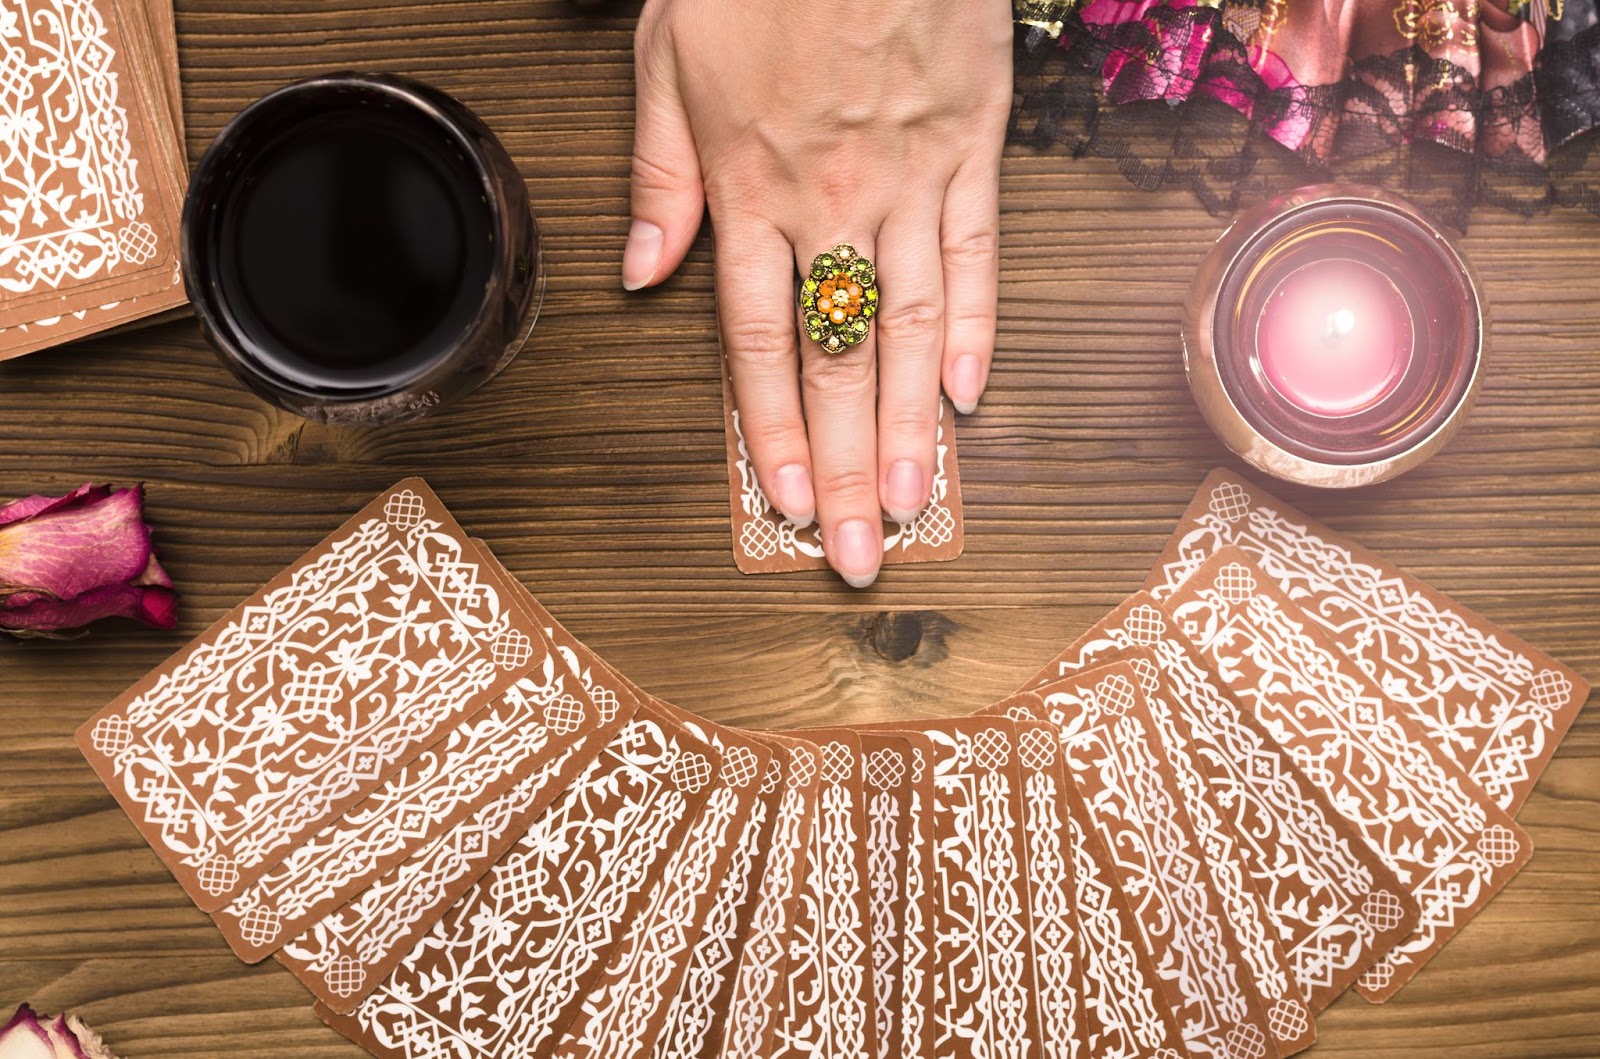 A spread of tarot cards with a woman's hand hovering over one card.